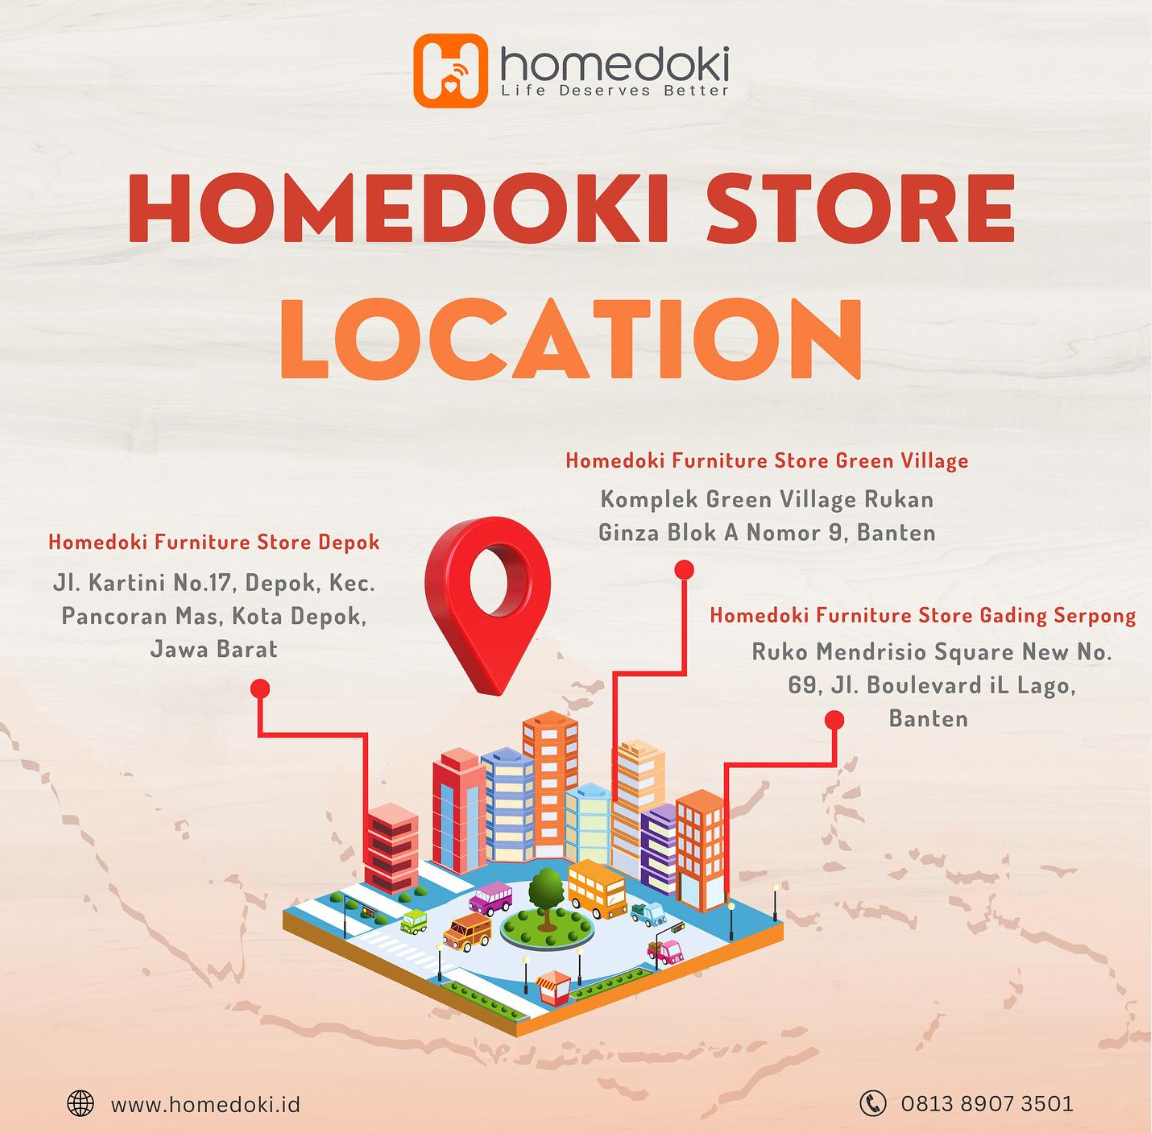 Dedicated To Serve The Market,  3 Homedoki Showrooms Now Available in Greater Jakarta